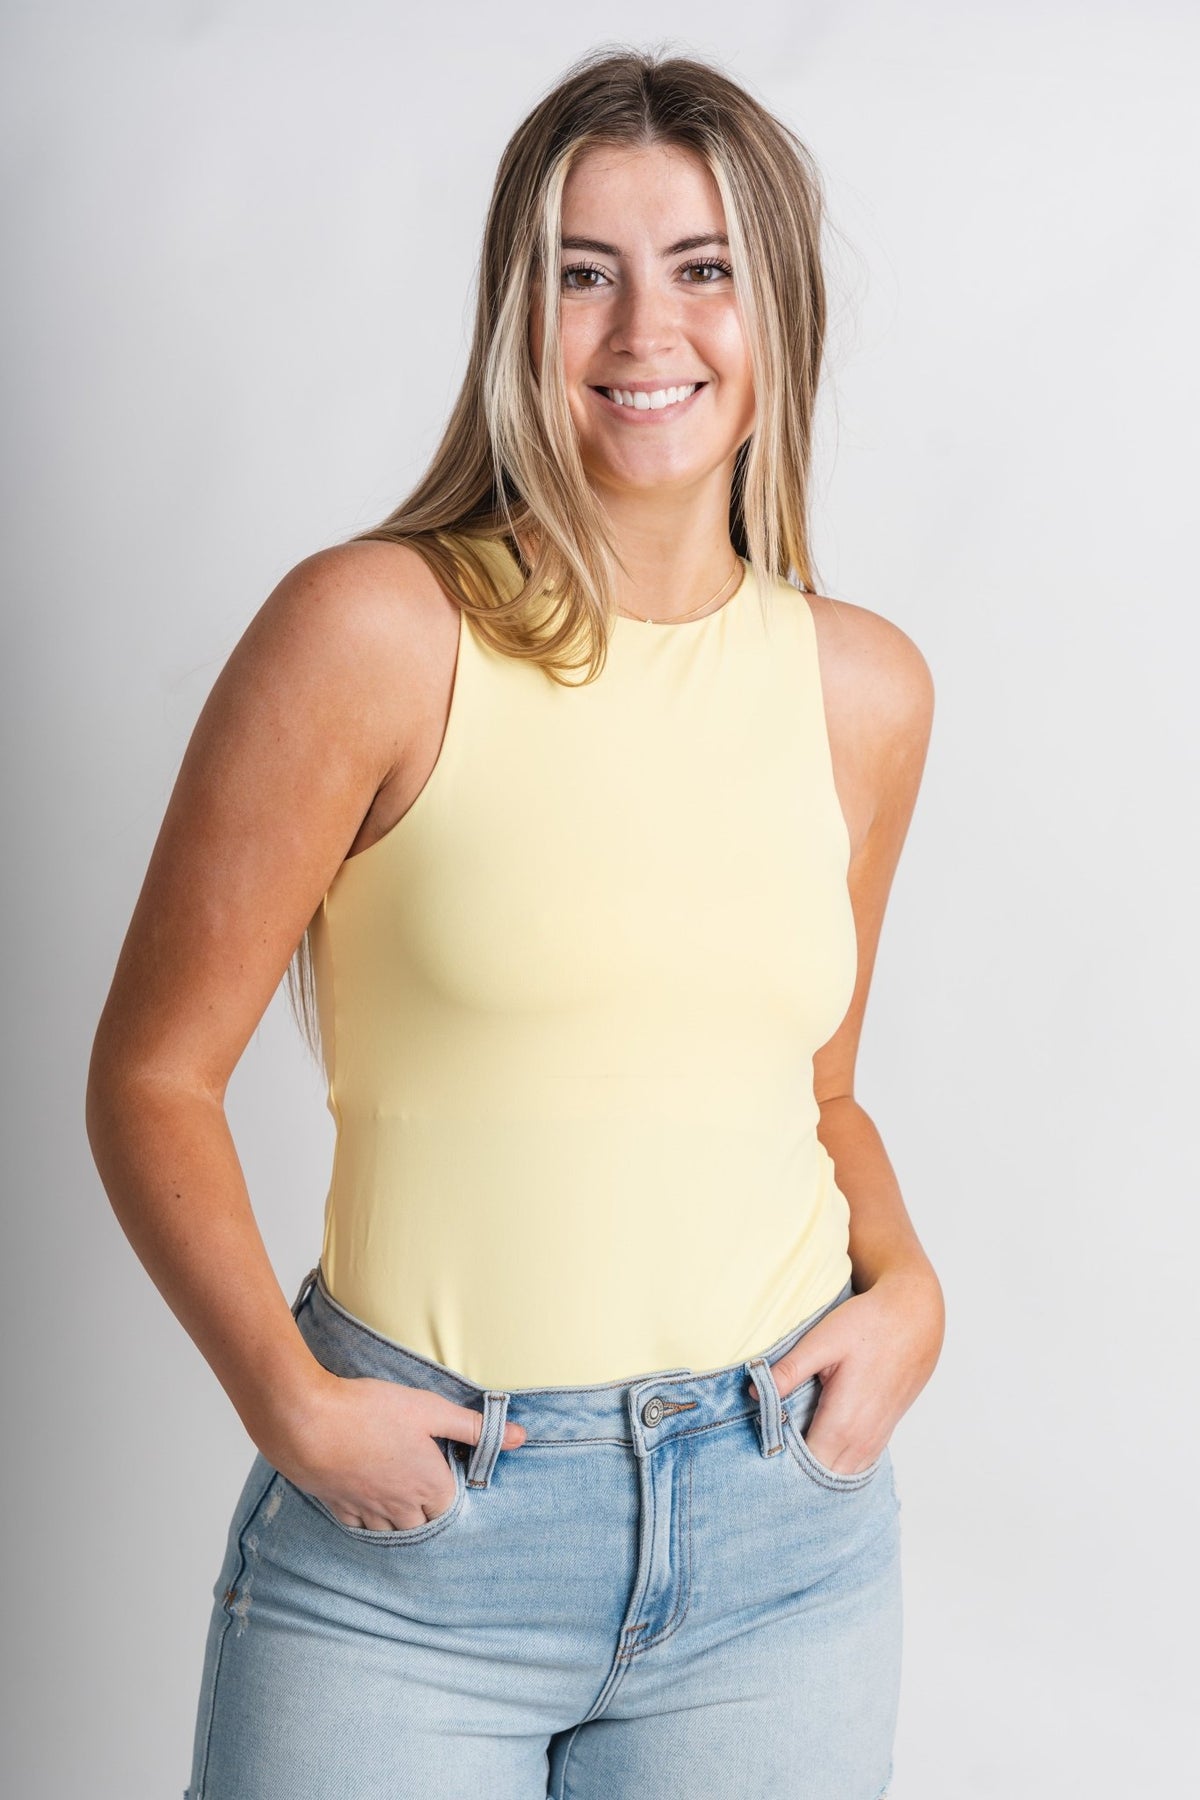 Sleeveless smooth soft bodysuit lemon - Trendy bodysuit - Cute Vacation Collection at Lush Fashion Lounge Boutique in Oklahoma City